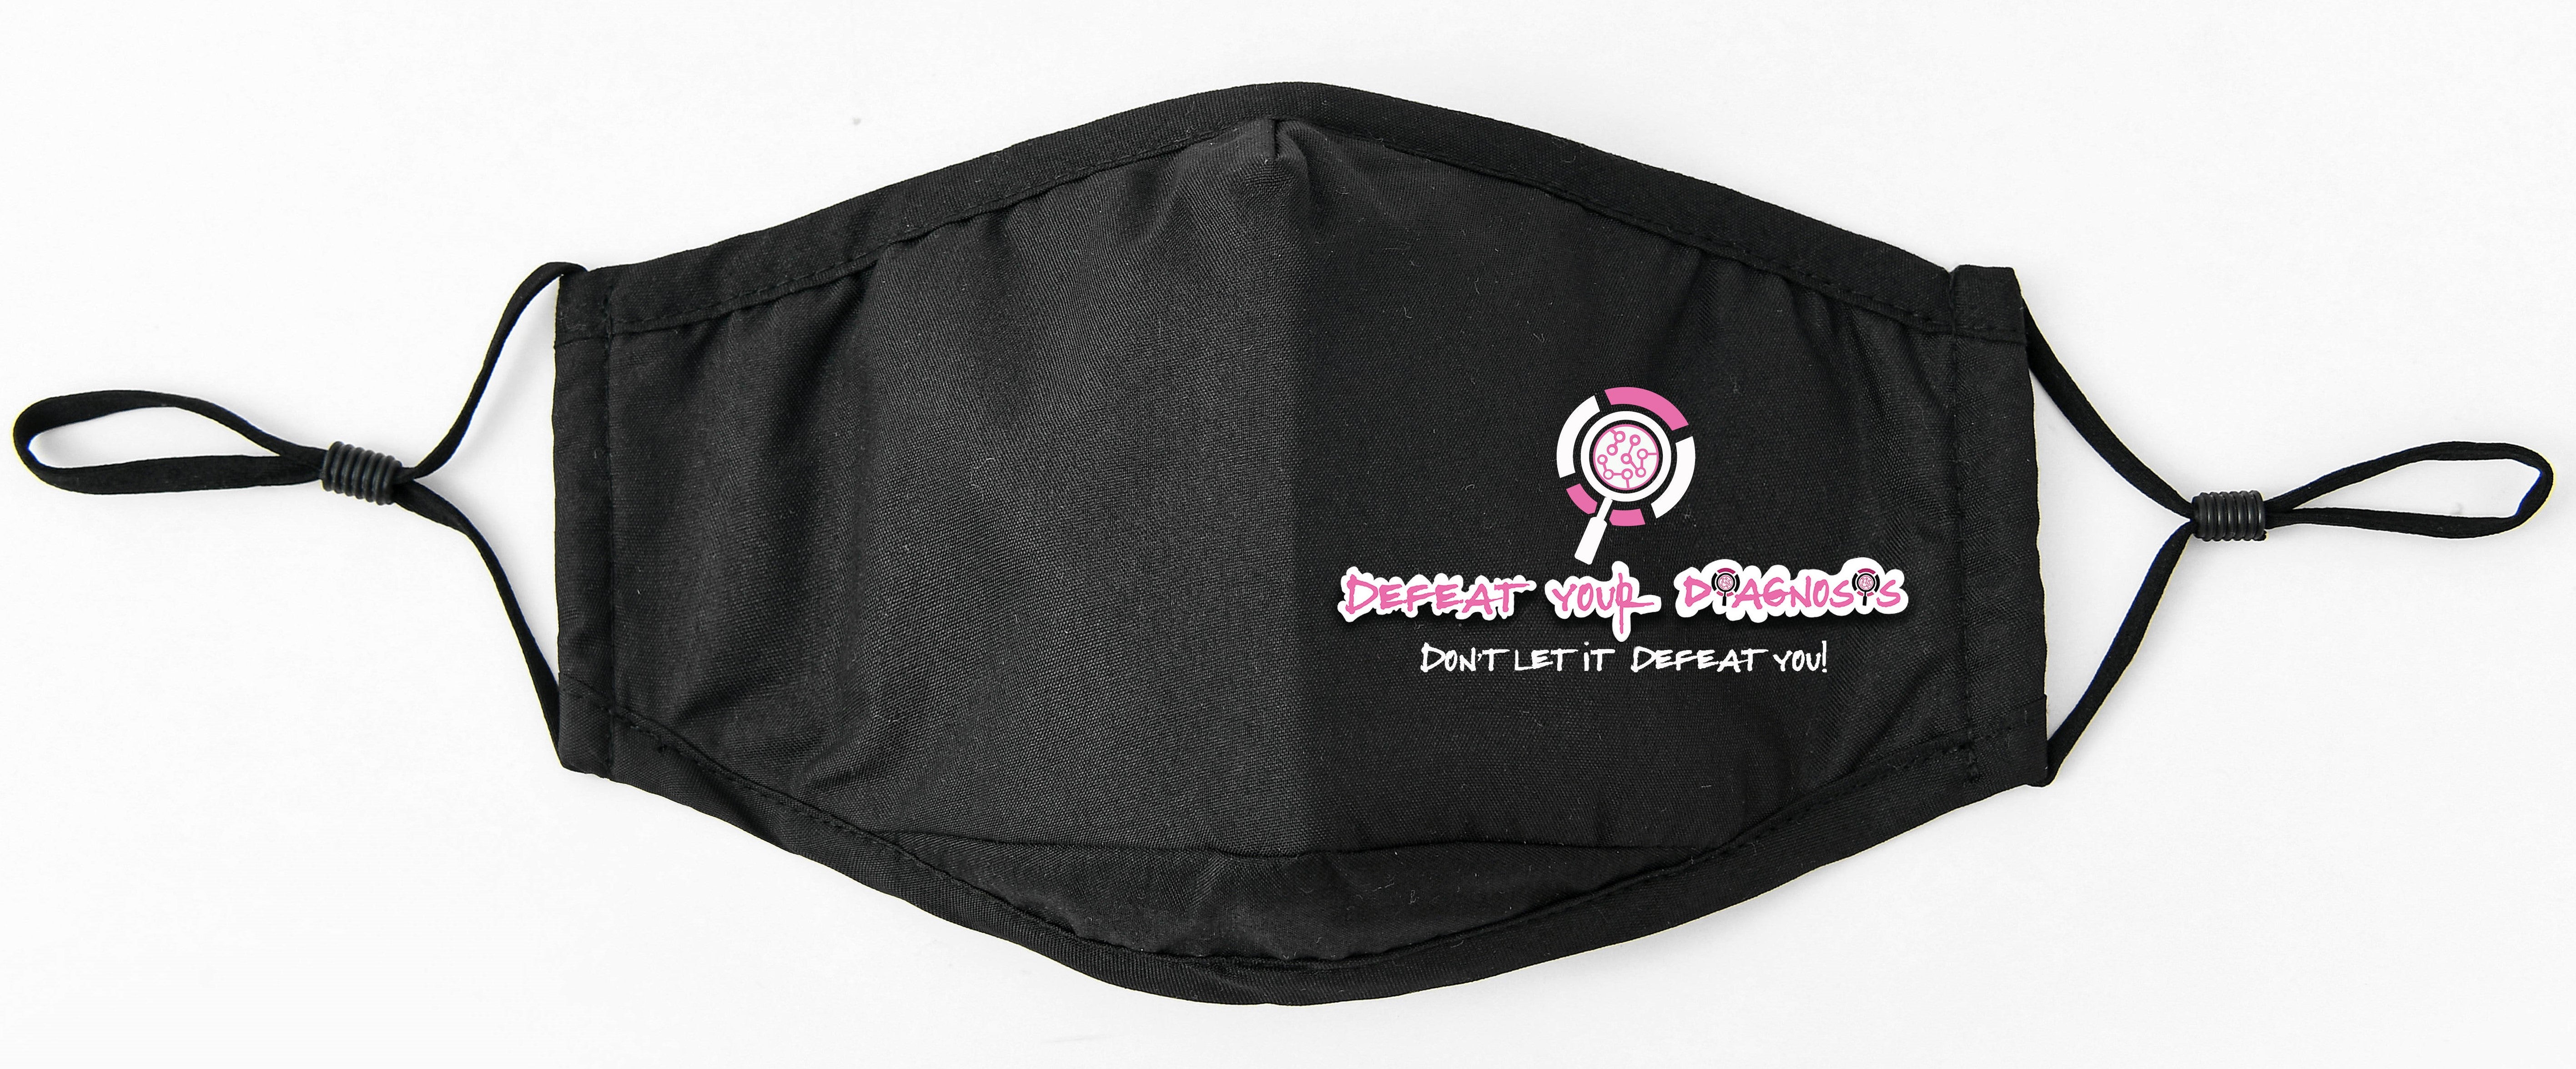 Defeat Your Diagnosis Simple logo Mask with adjustable straps